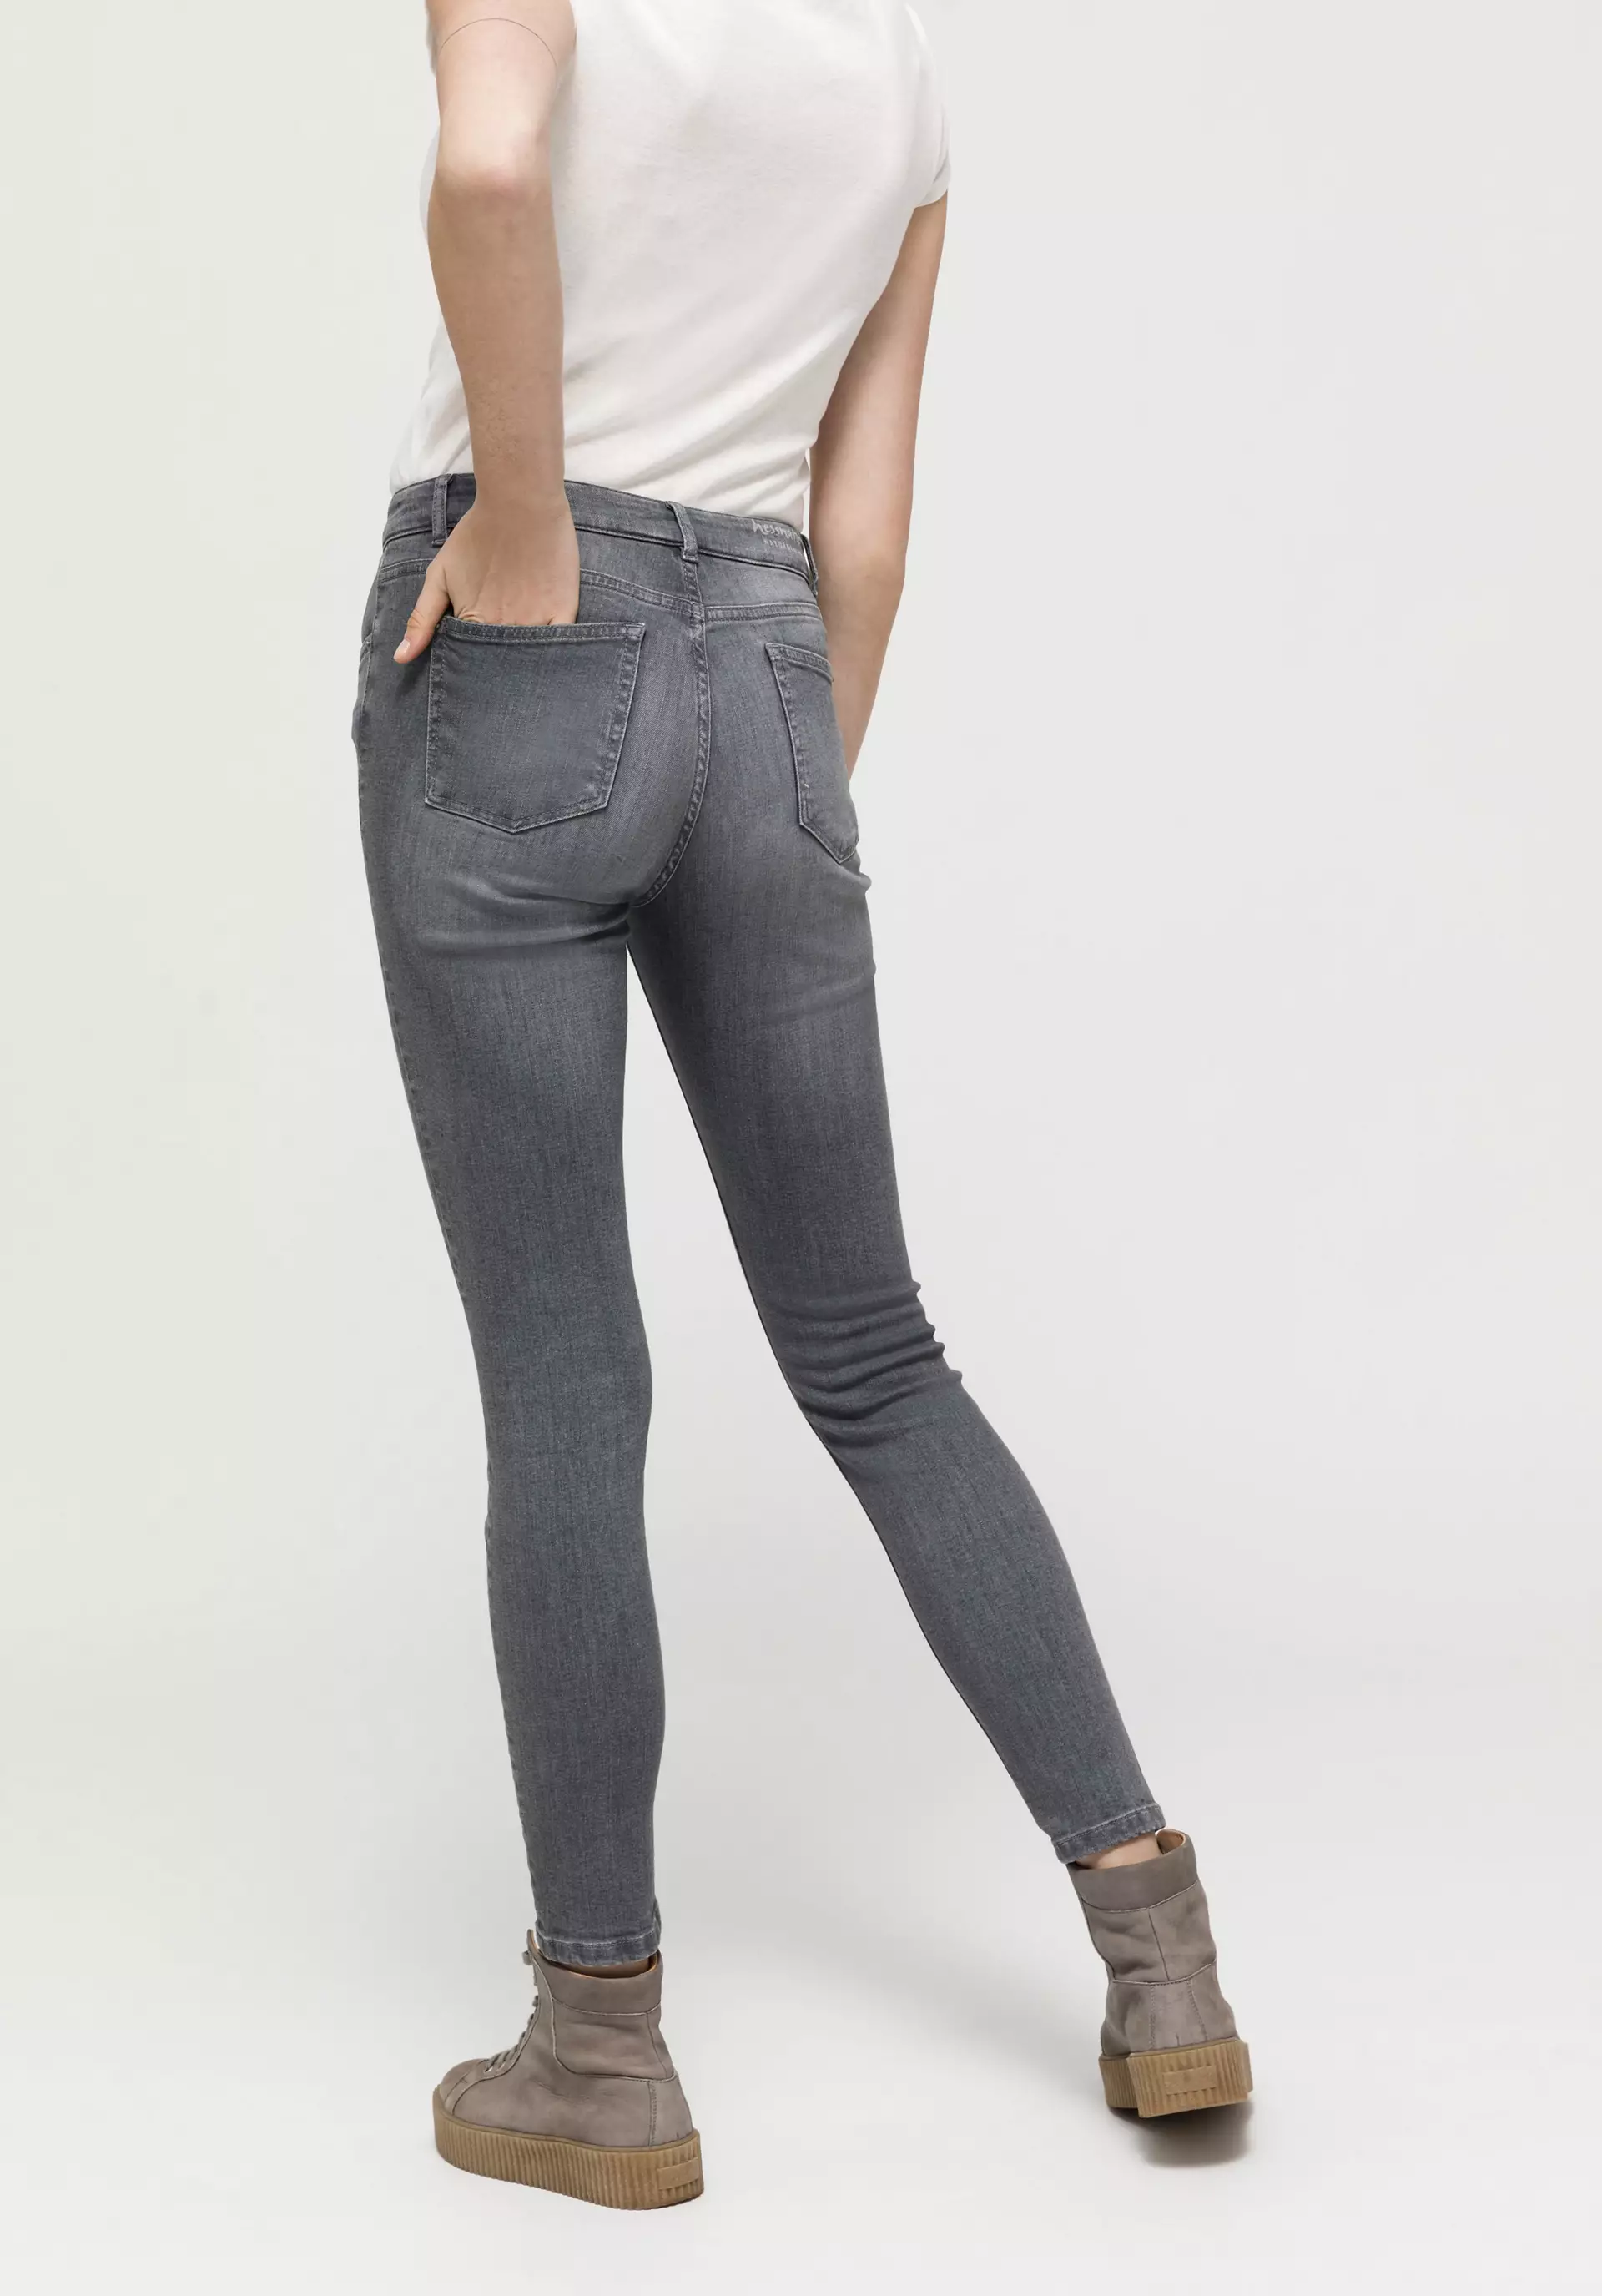 LINA Mid Rise Skinny jeans made from organic denim - 3